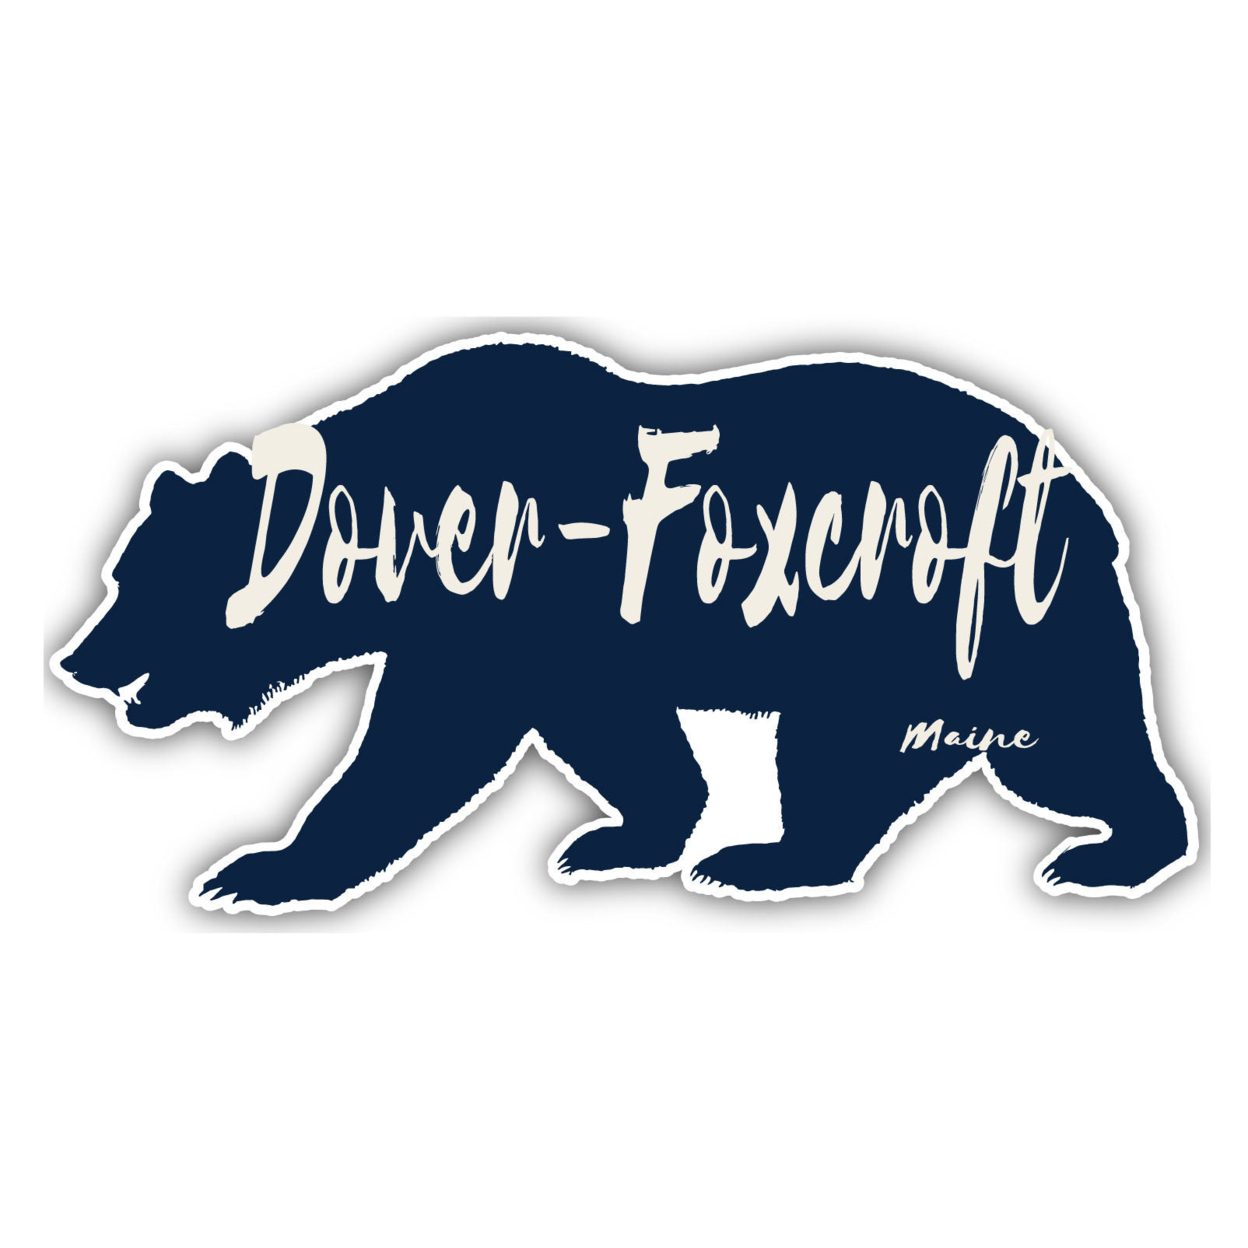 Dover-Foxcroft Maine Souvenir Decorative Stickers (Choose Theme And Size) - 4-Pack, 6-Inch, Bear